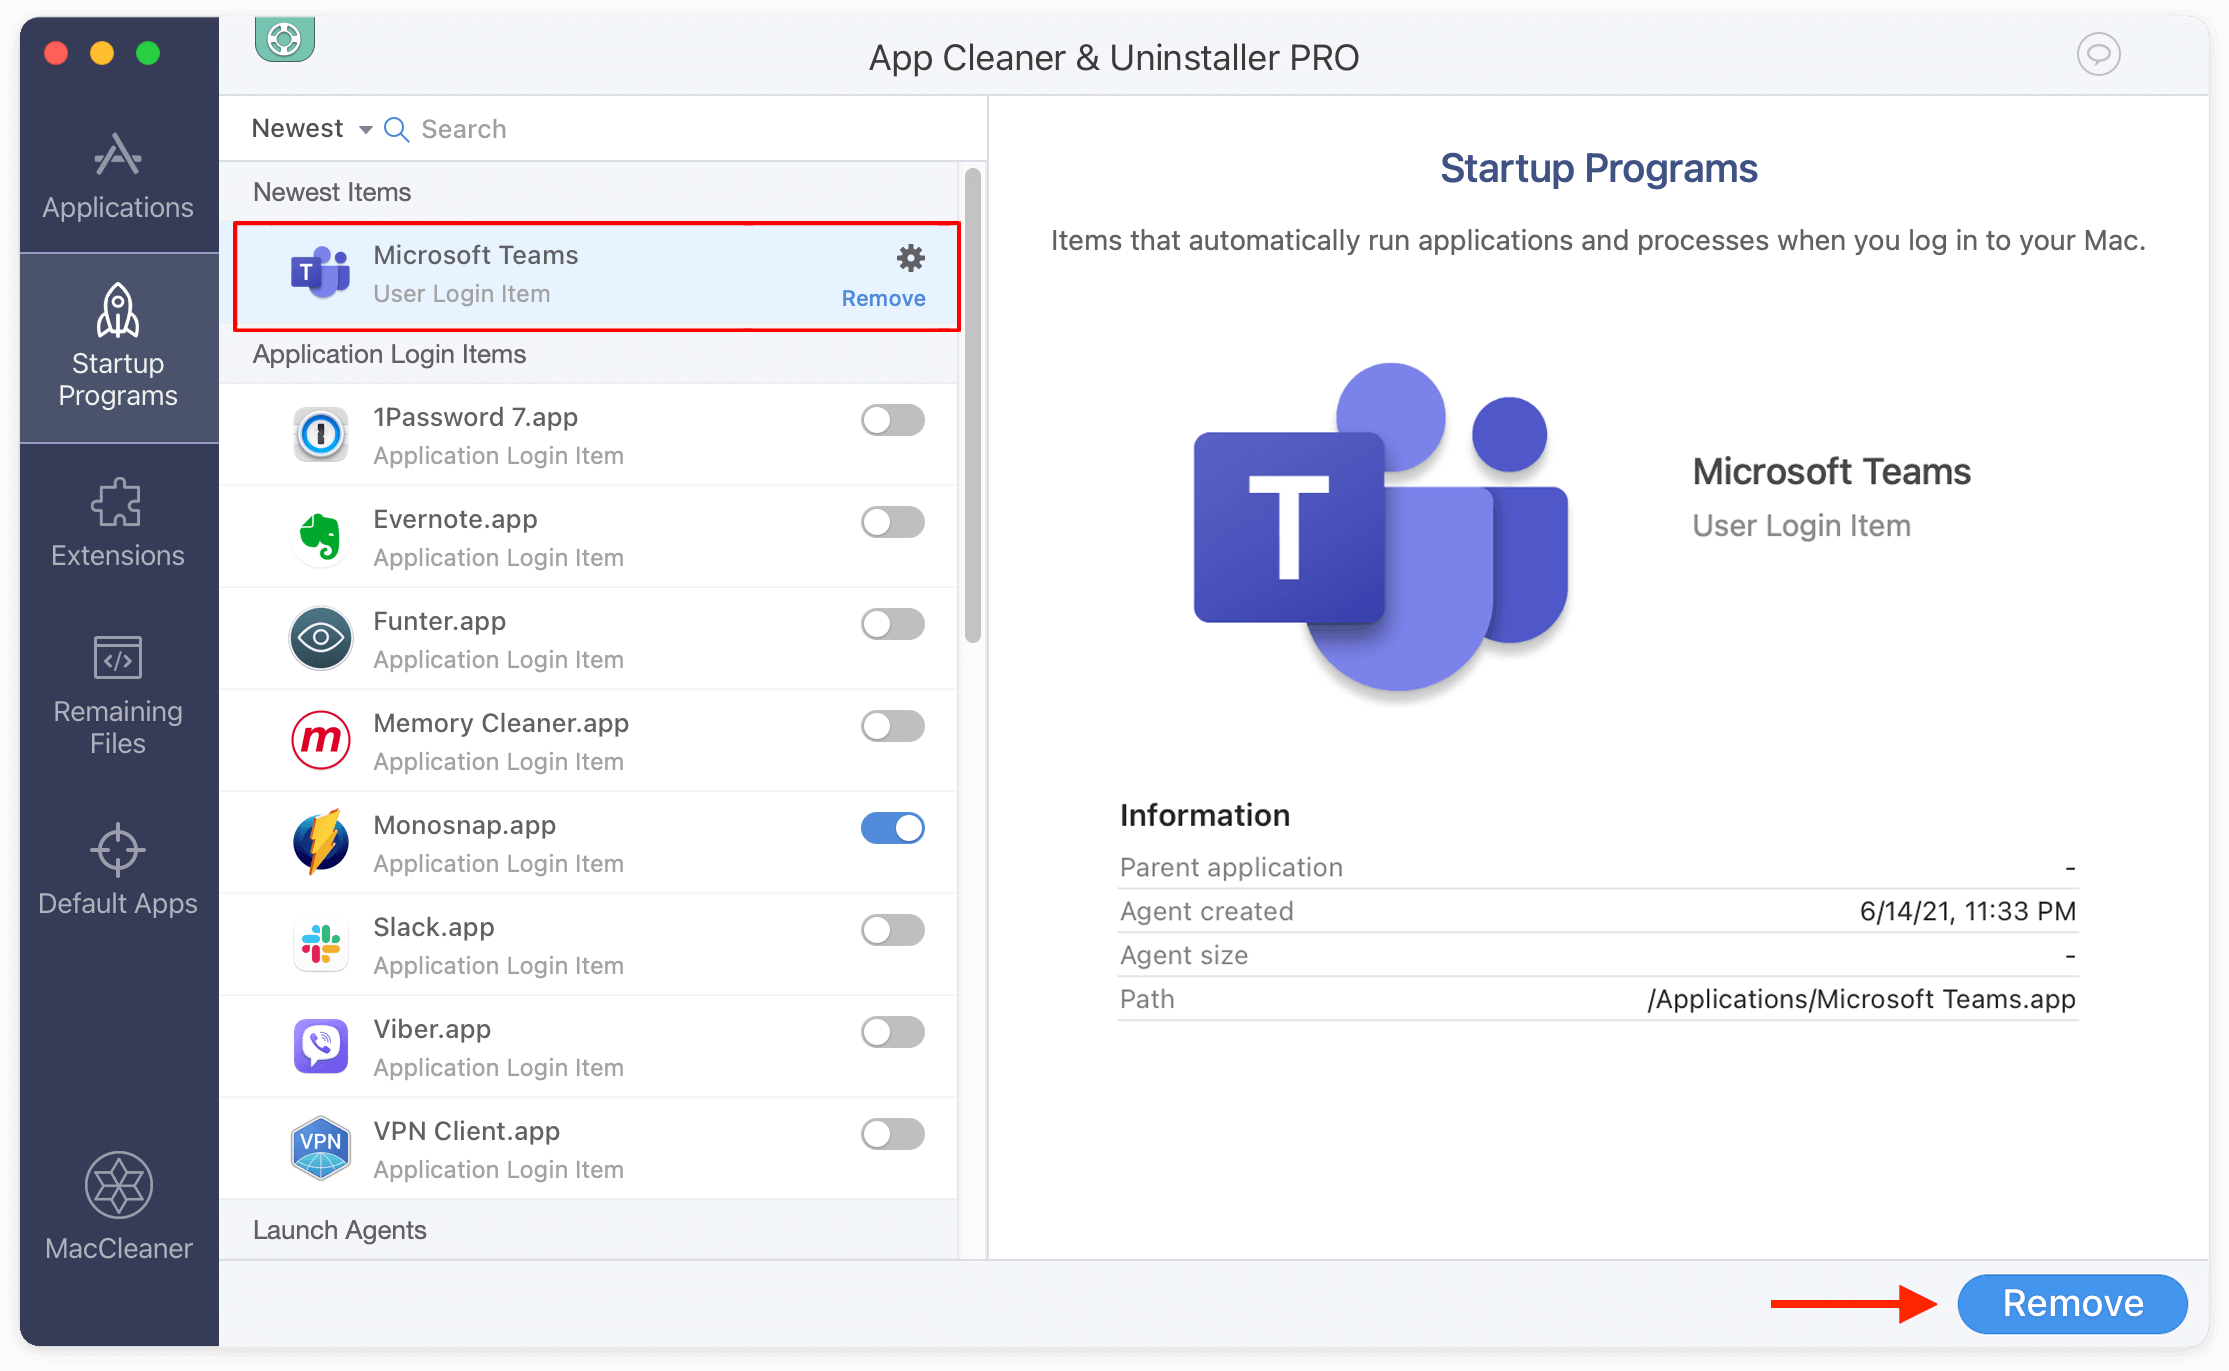 Click on Remove to stop Microsoft Teams from starting automatically